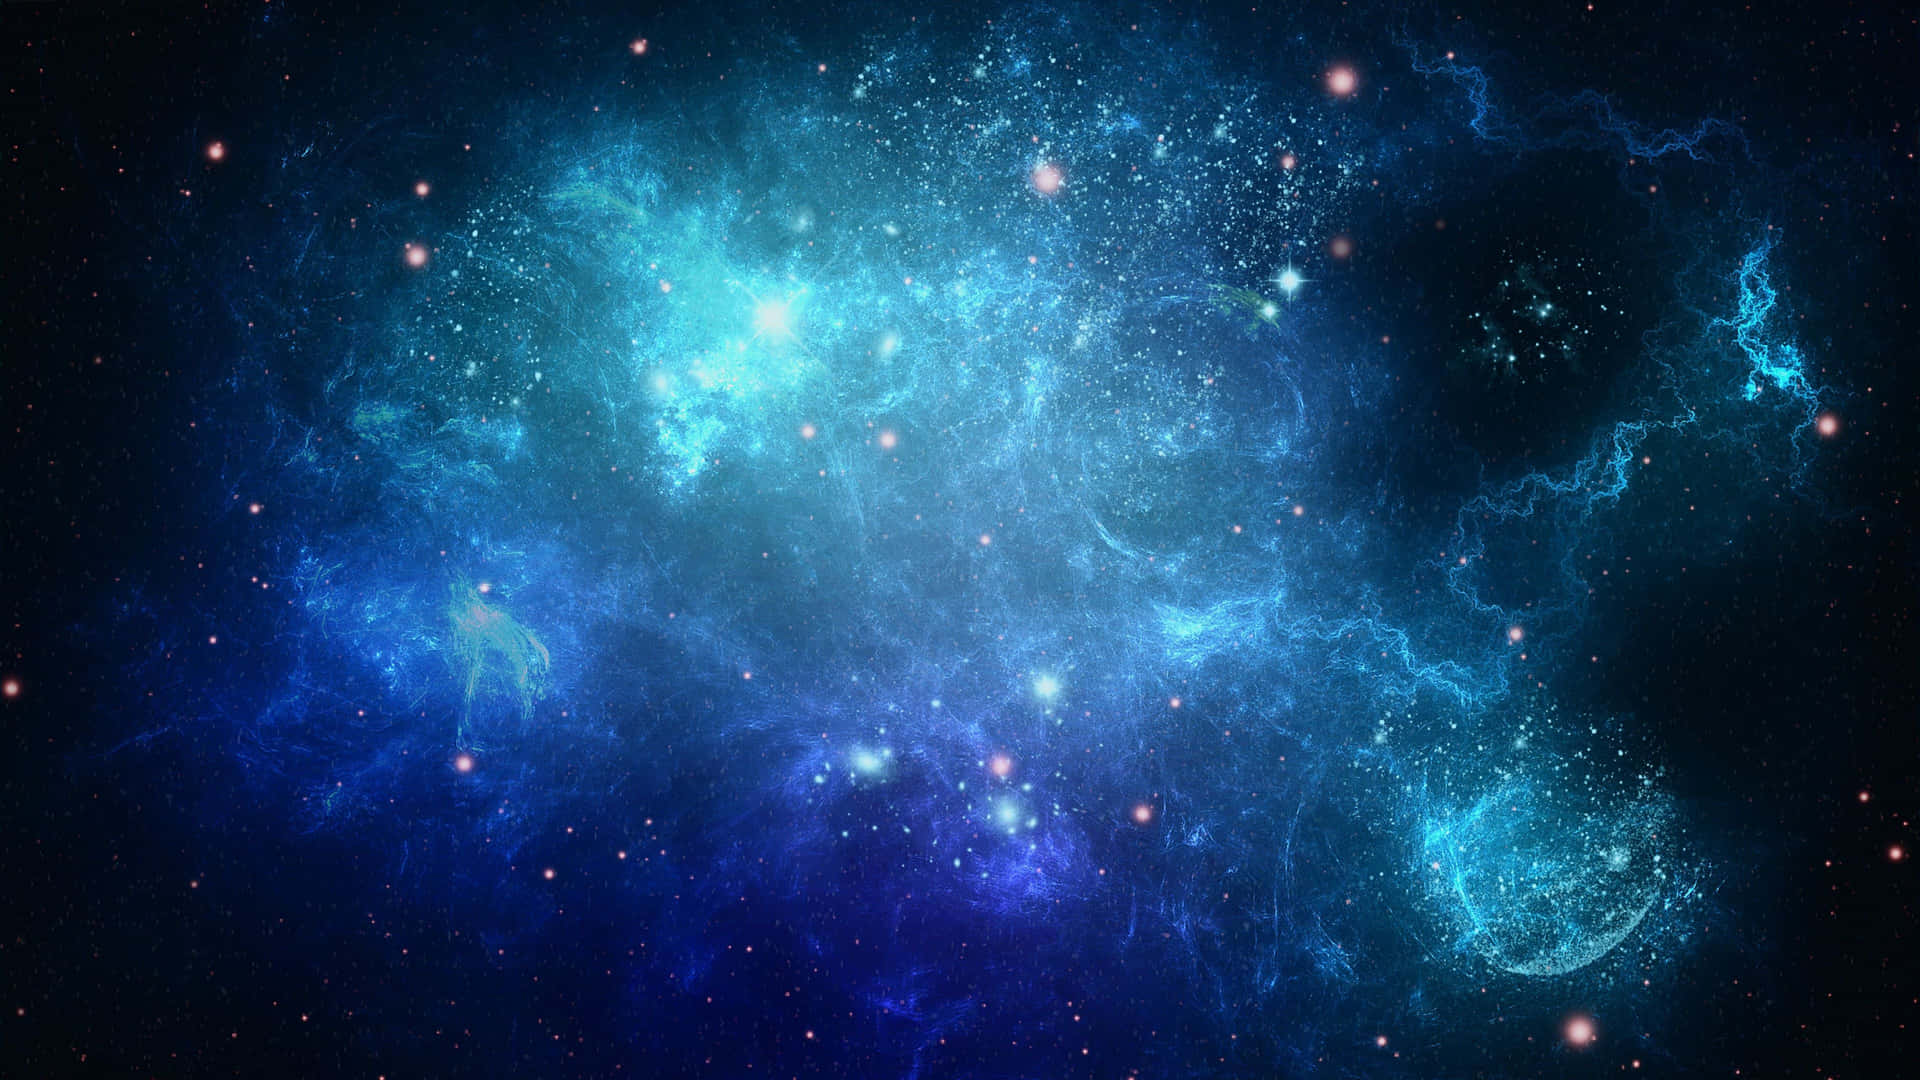 Explore the infinite depths of the Blue Space